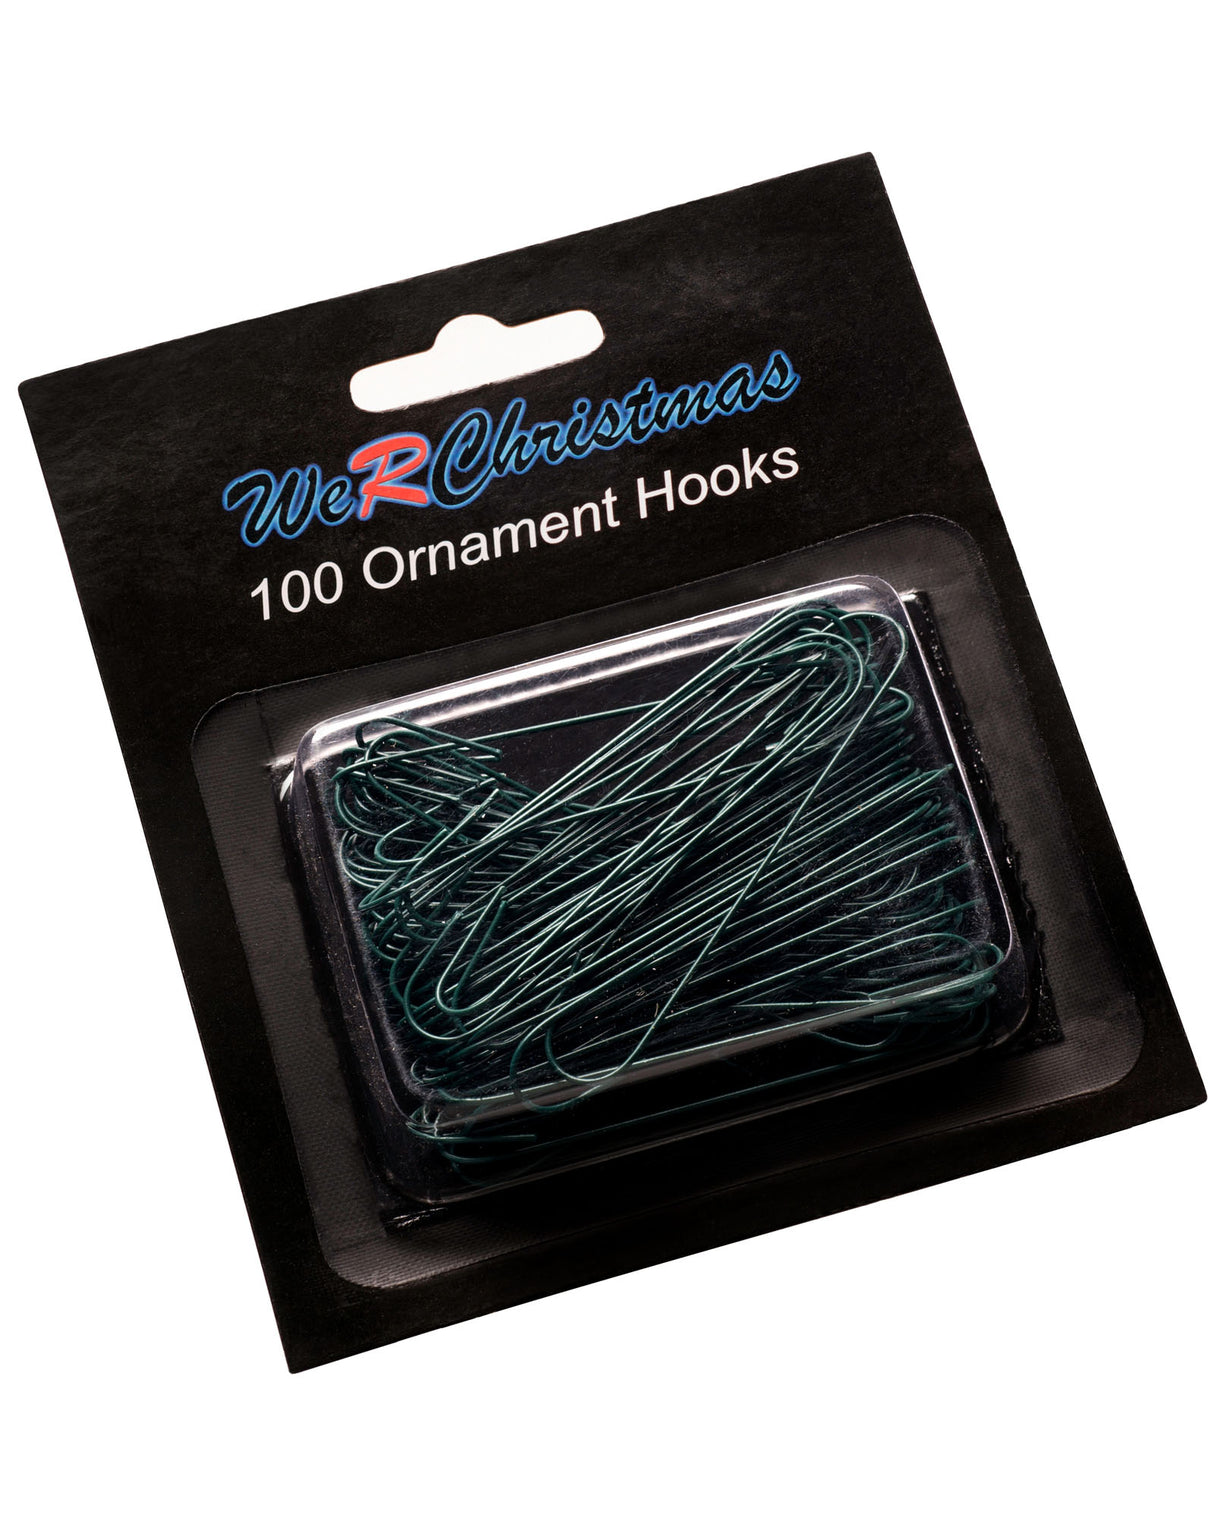 Bauble Ornament Hooks, Green, Pack of 100